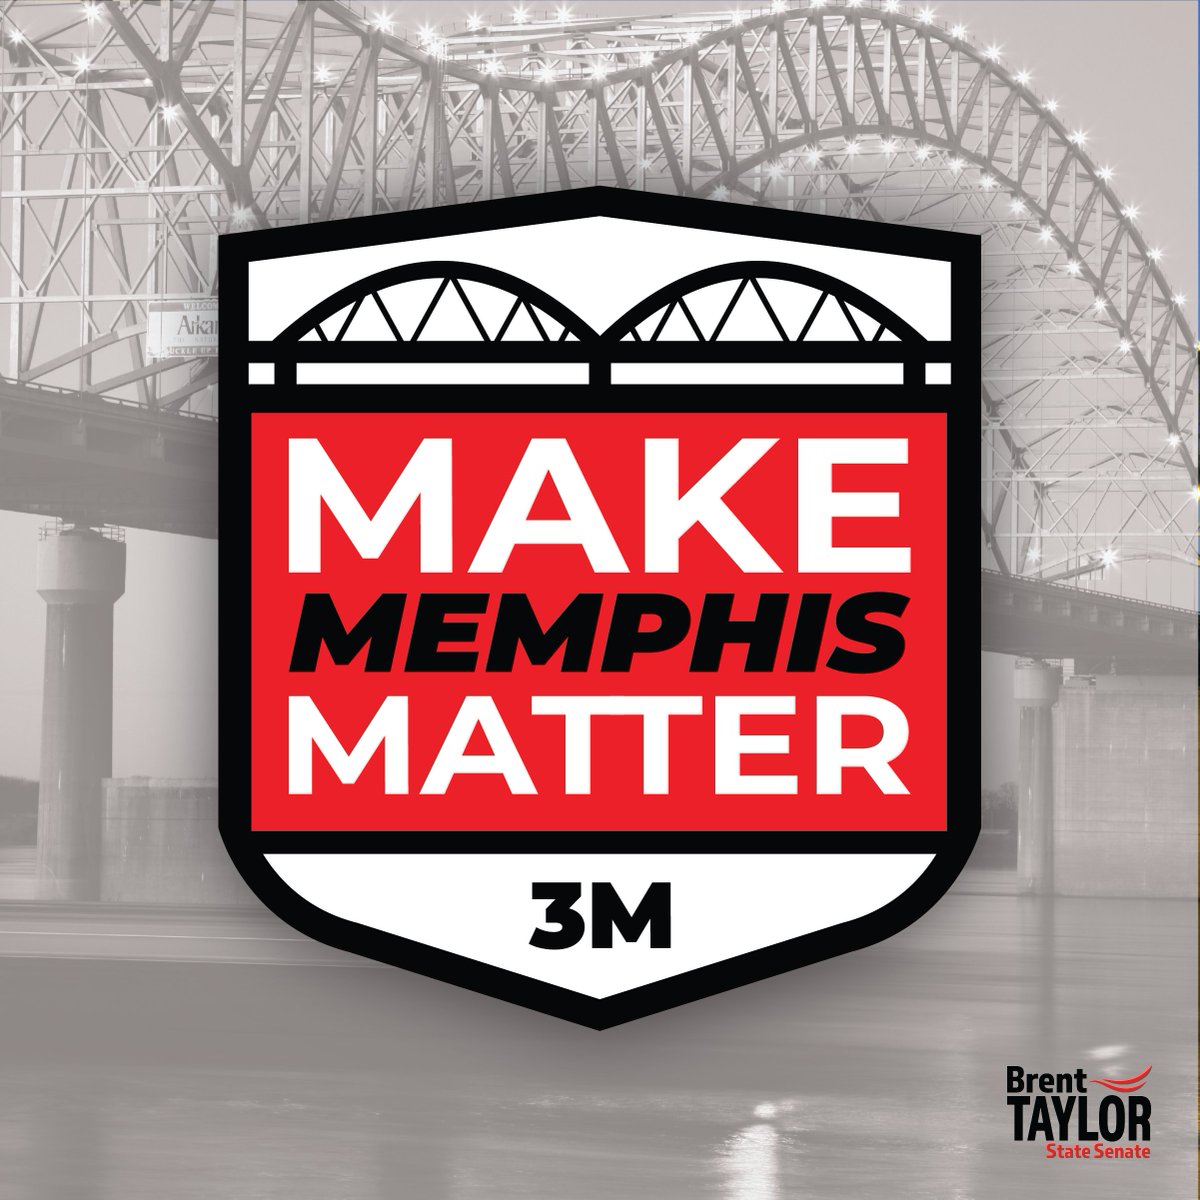 If you’re tired of hearing me talk only about crime, know that I WILL NOT BACK DOWN. Memphians are tired of the violence and fear they have to endure simply to go to the grocery store. I will never stop working to #MakeMemphisMatter